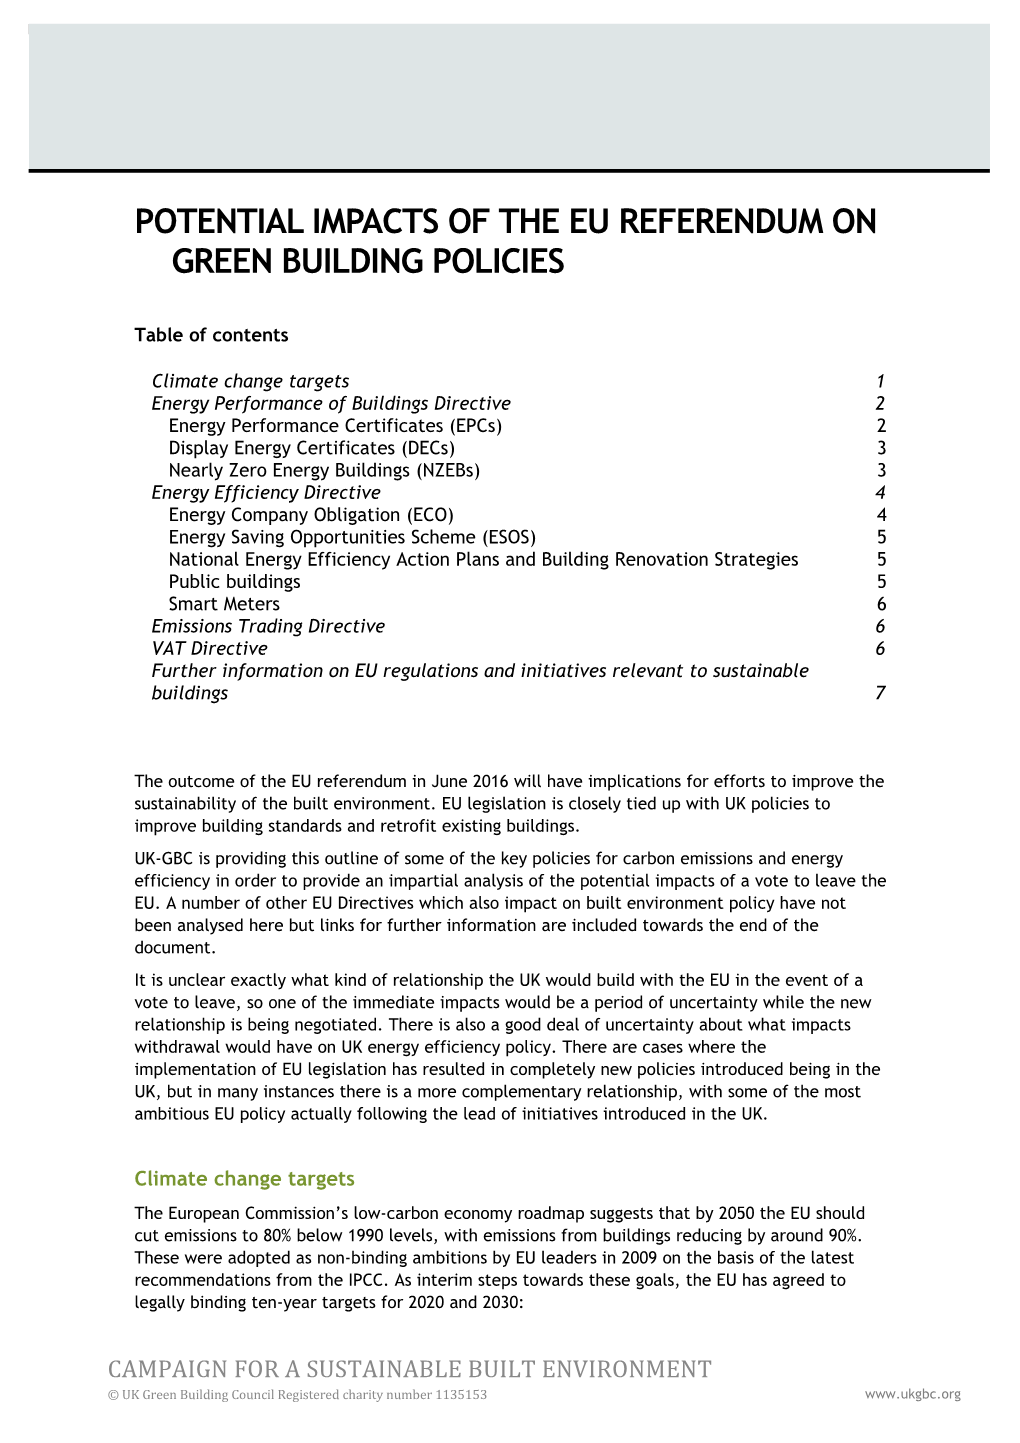 Potential Impacts of the EU Referendum on Green Building Policies